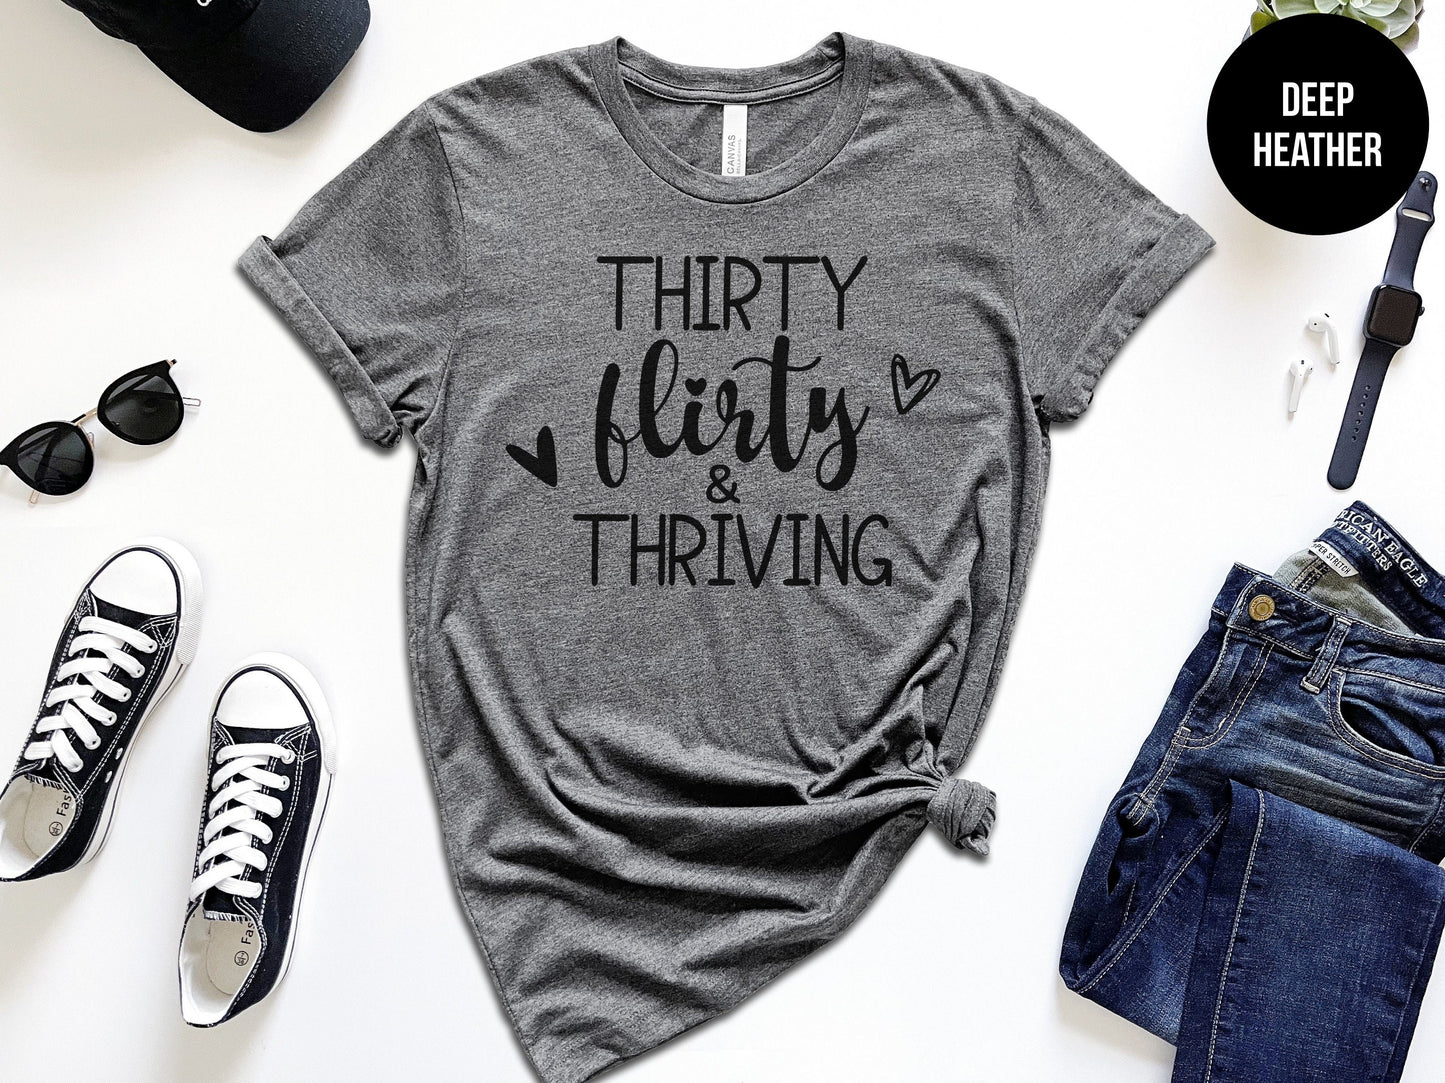 Thirty, Flirty and Thriving